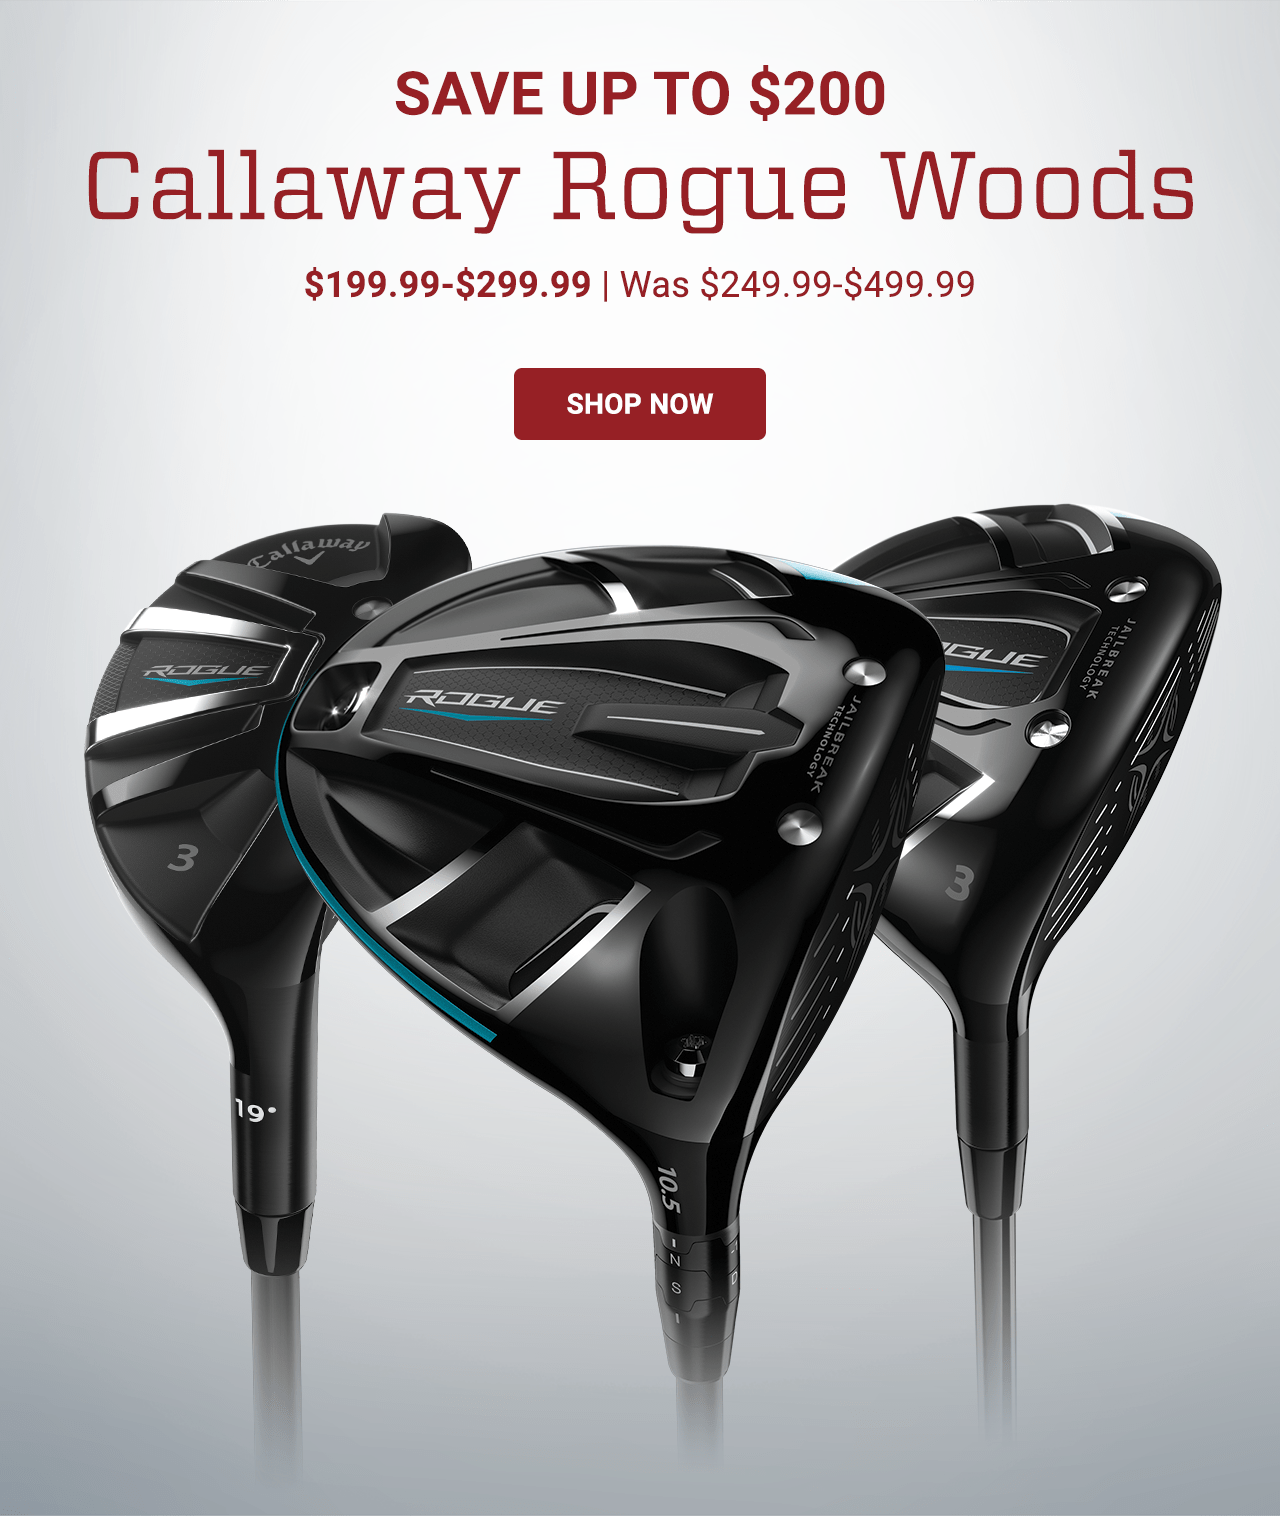 Save up to $200 on Callaway Rogue Woods. $199.99 to $299.99. Was $249.99 to $499.99. Shop now.